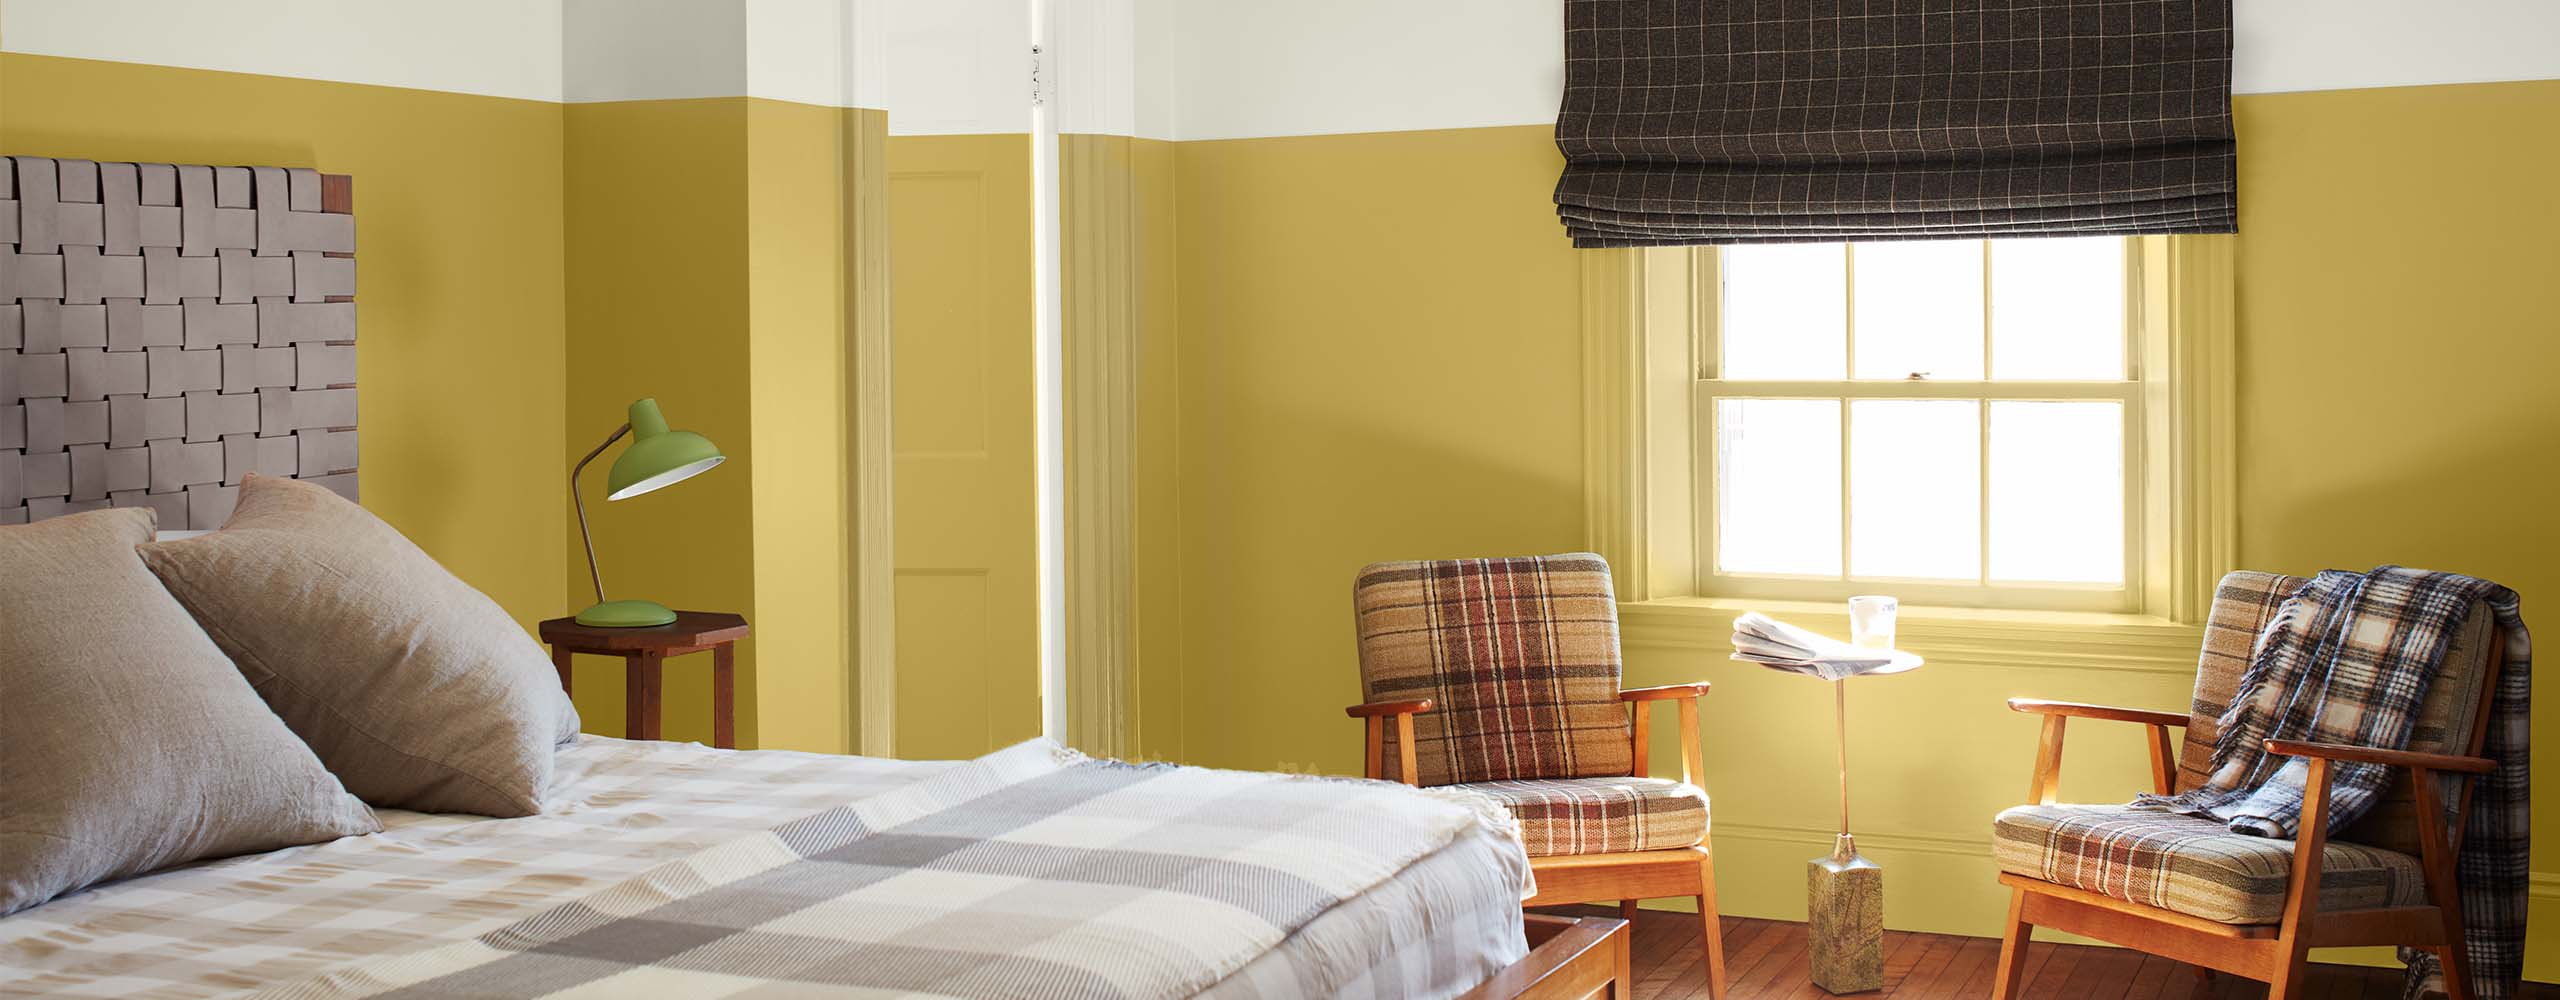 A bright two-tone painted bedroom with white-painted upper walls, upper door and ceiling, yellow-painted lower walls and door, tan checked bedding and two plaid chairs.